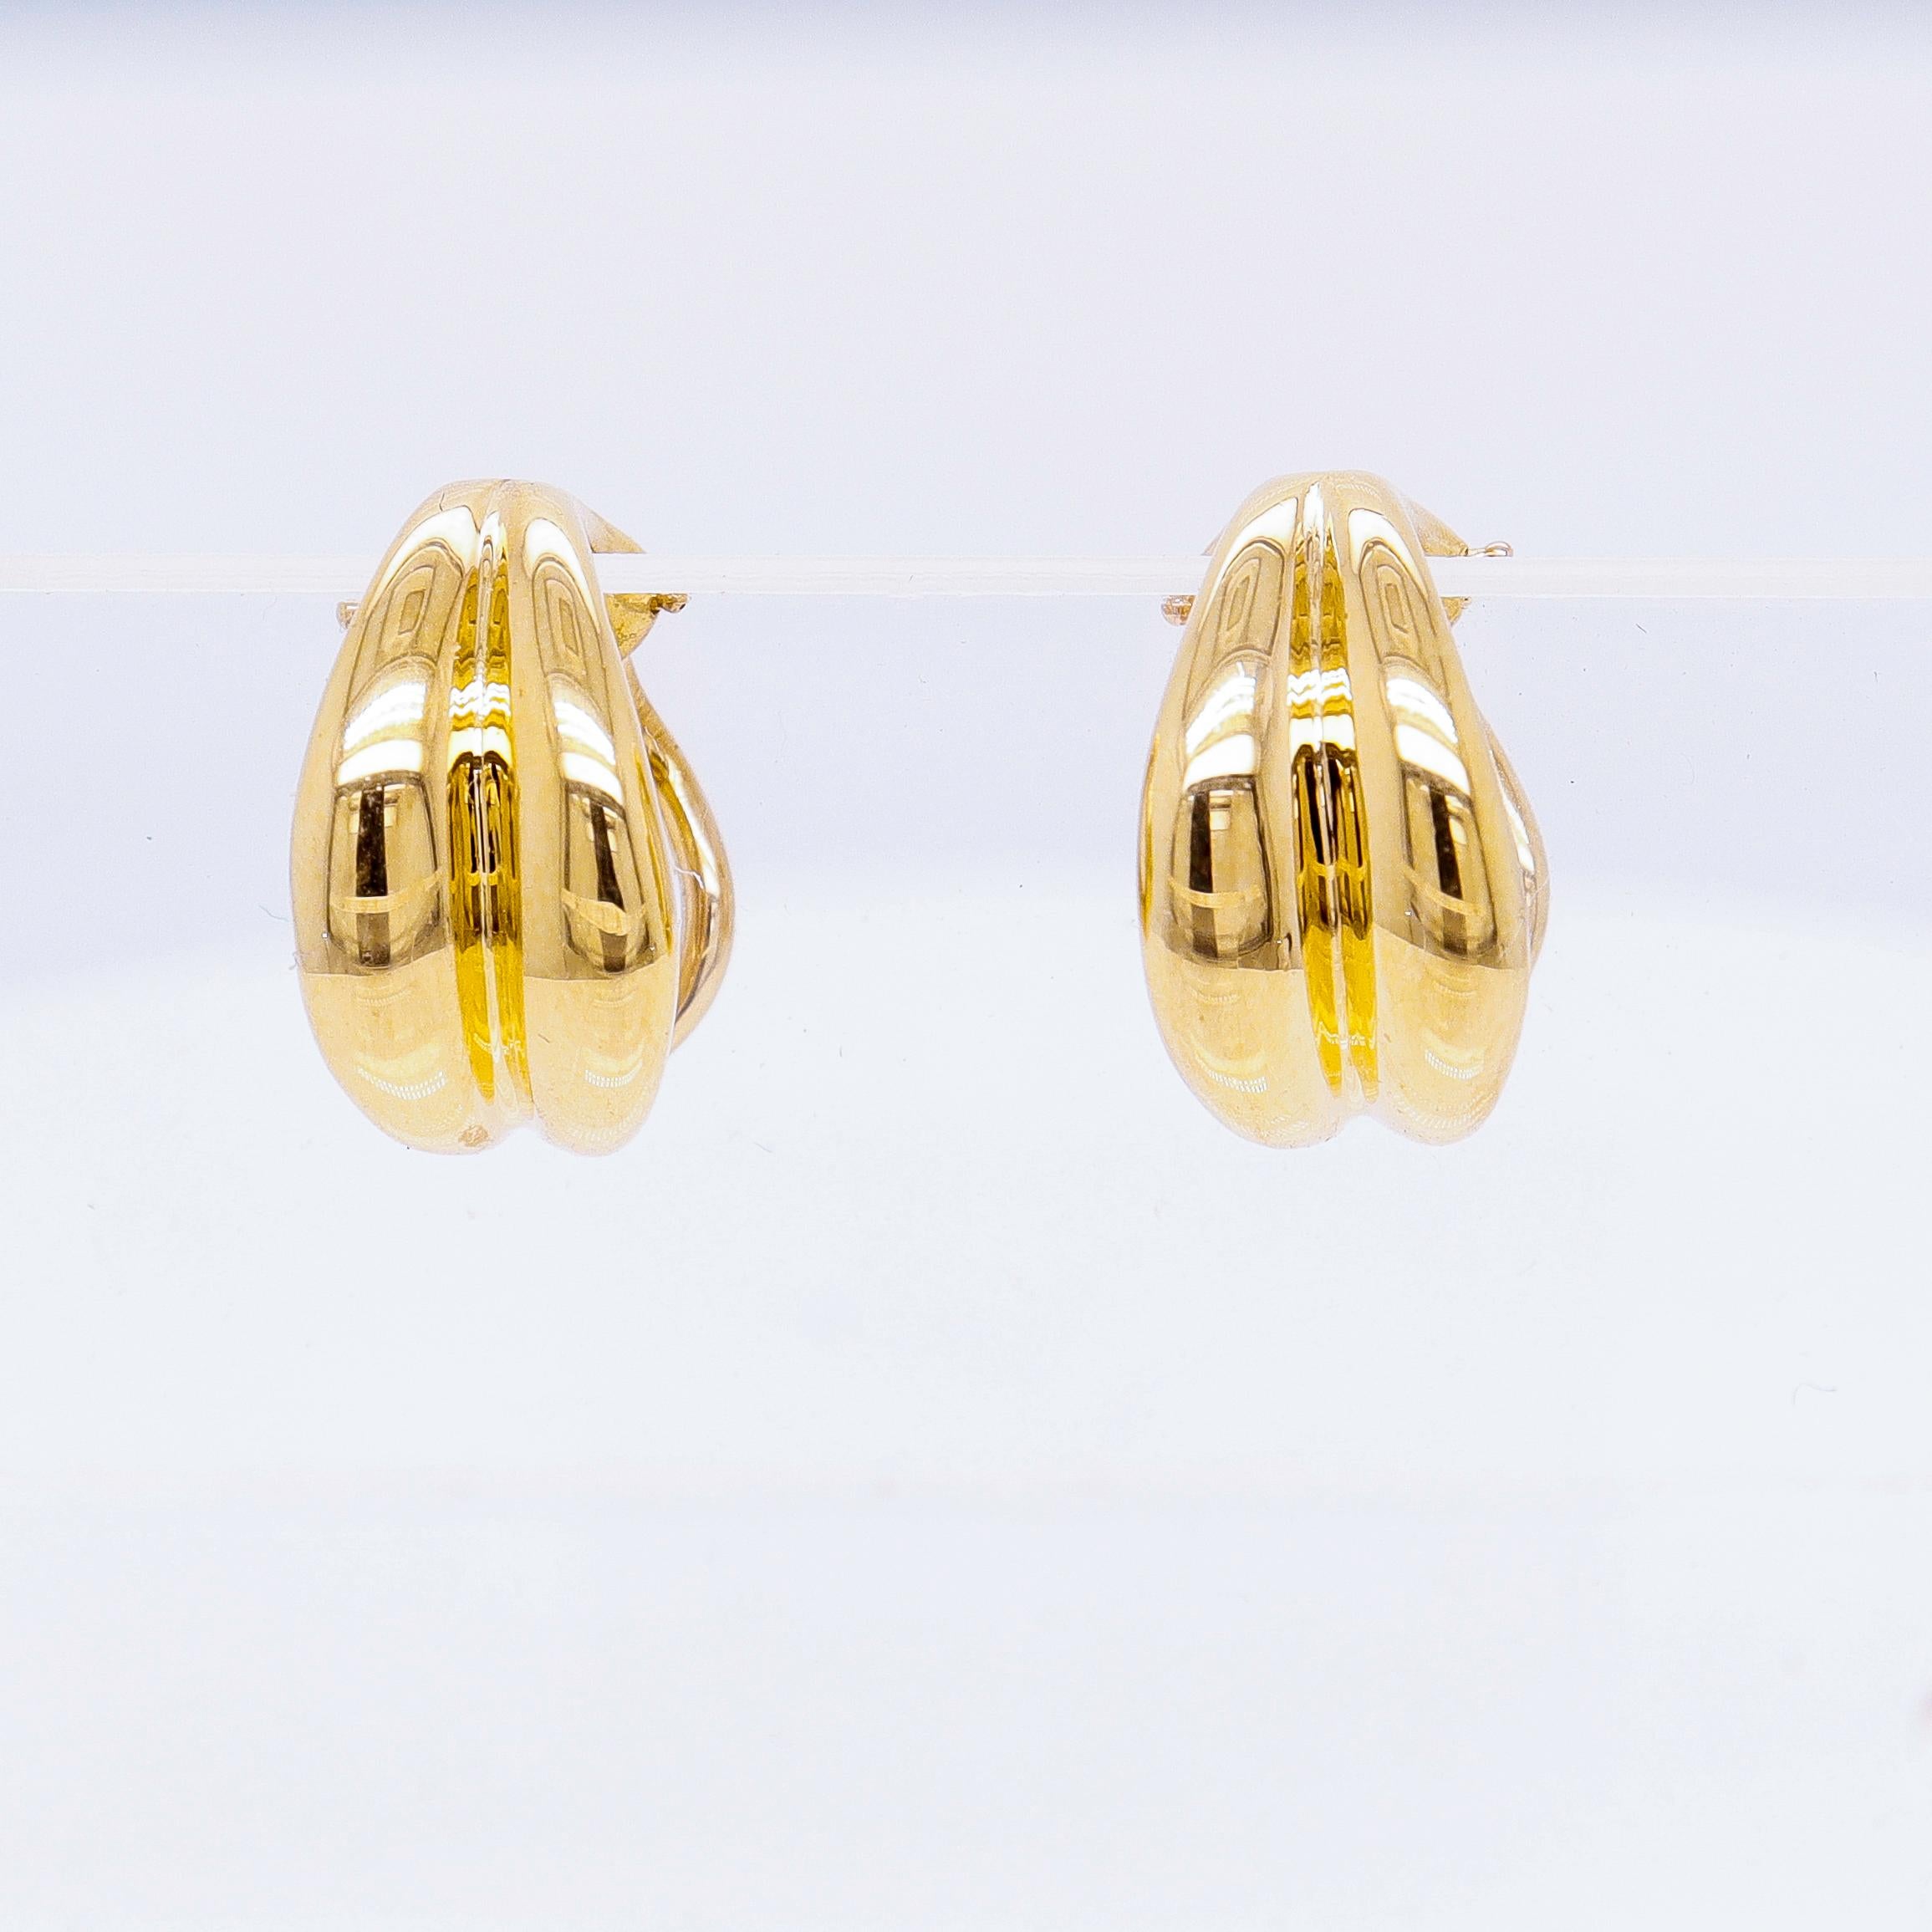 A fine pair of small-scale shrimp (or huggie style) omega clip earrings.

By Tiffany & Co.

In 18k yellow gold.

Simply a wonderful, classic Tiffany form!

Date:
Late 20th Century

Overall Condition:
They are in overall good, as-pictured, used